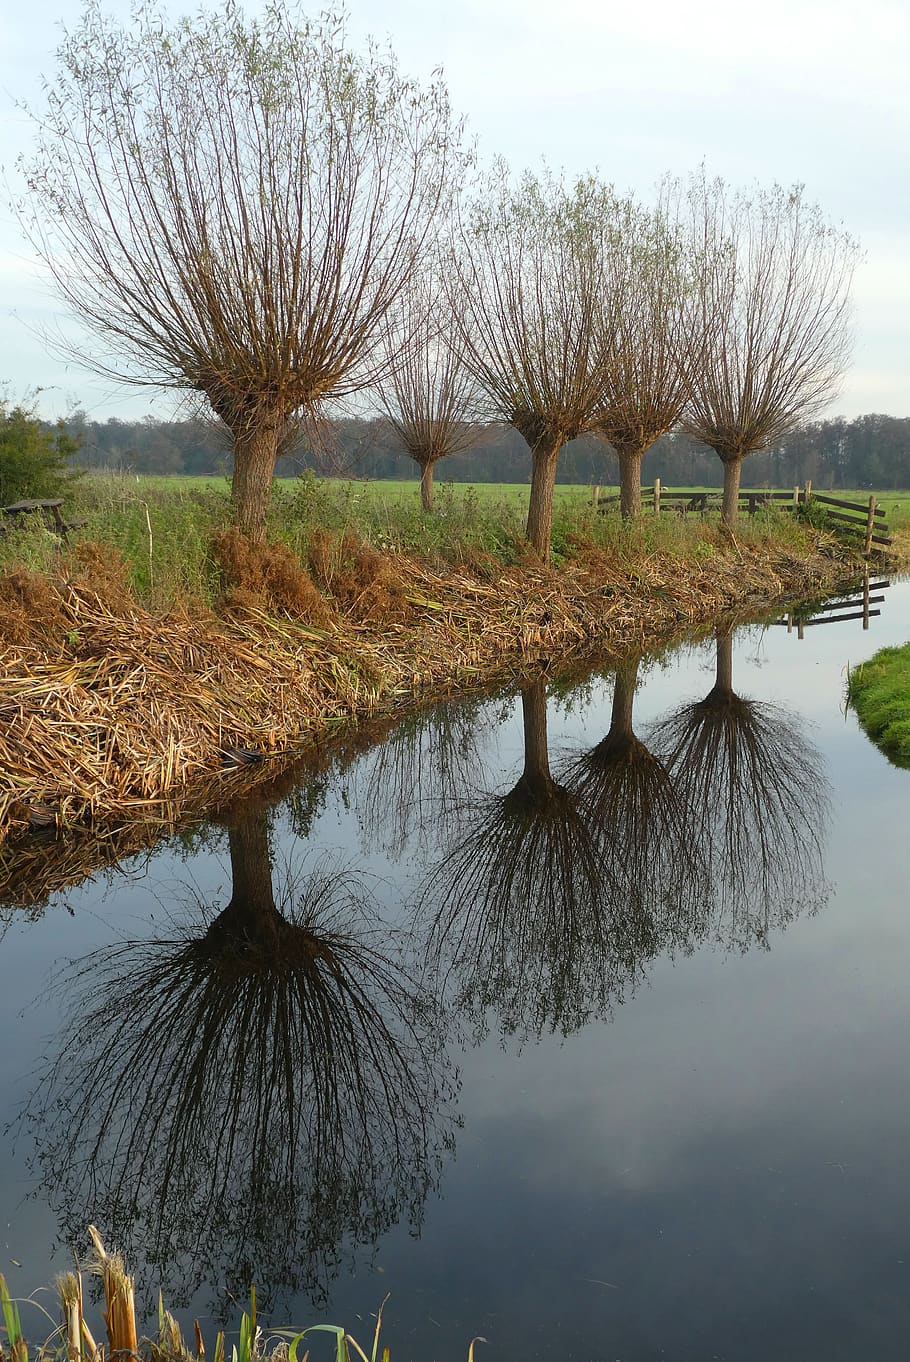 willow, ditch, reflection, winter, bald, pollard willow, landscape, netherlands, pasture, branches